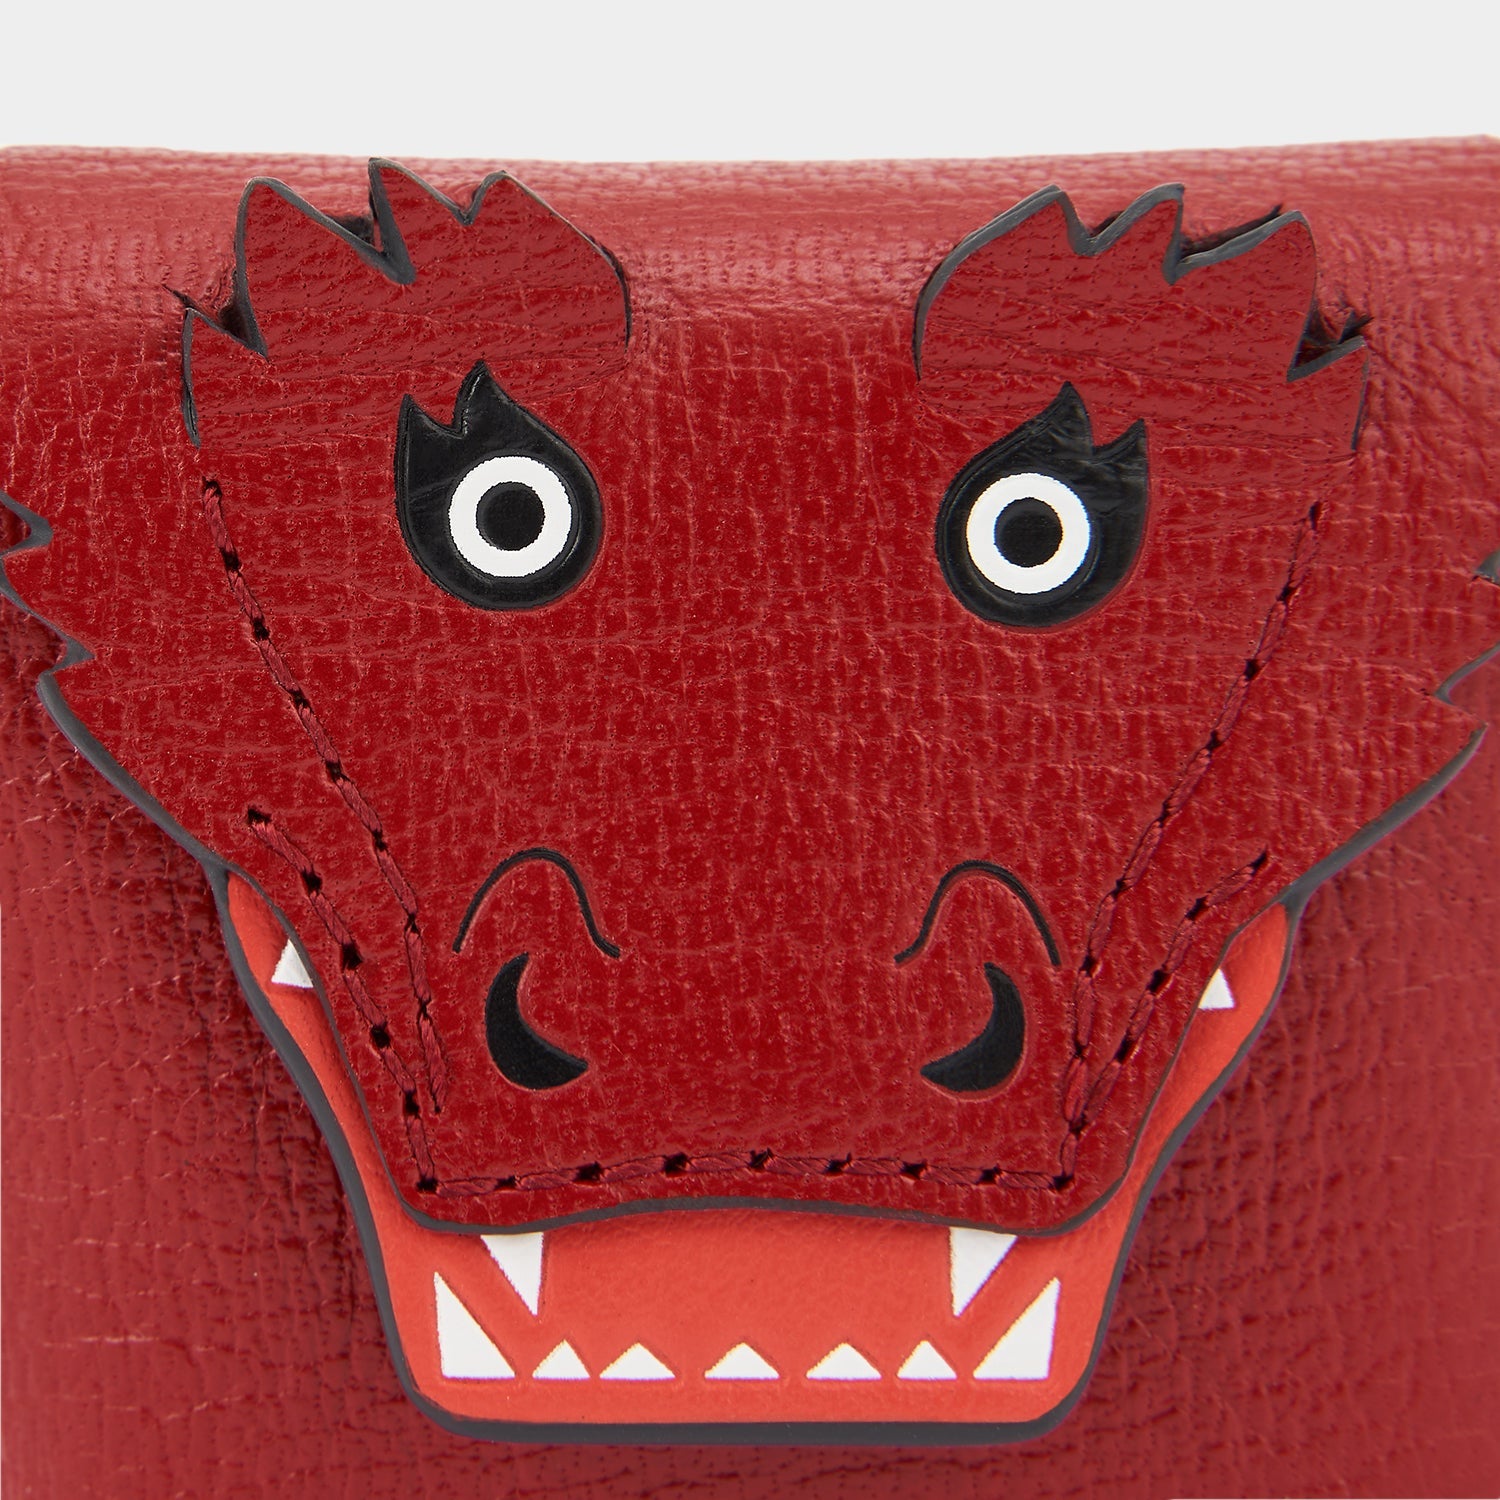 Dragon Earphones Pouch -

                  
                    Capra Leather in Russet -
                  

                  Anya Hindmarch US
